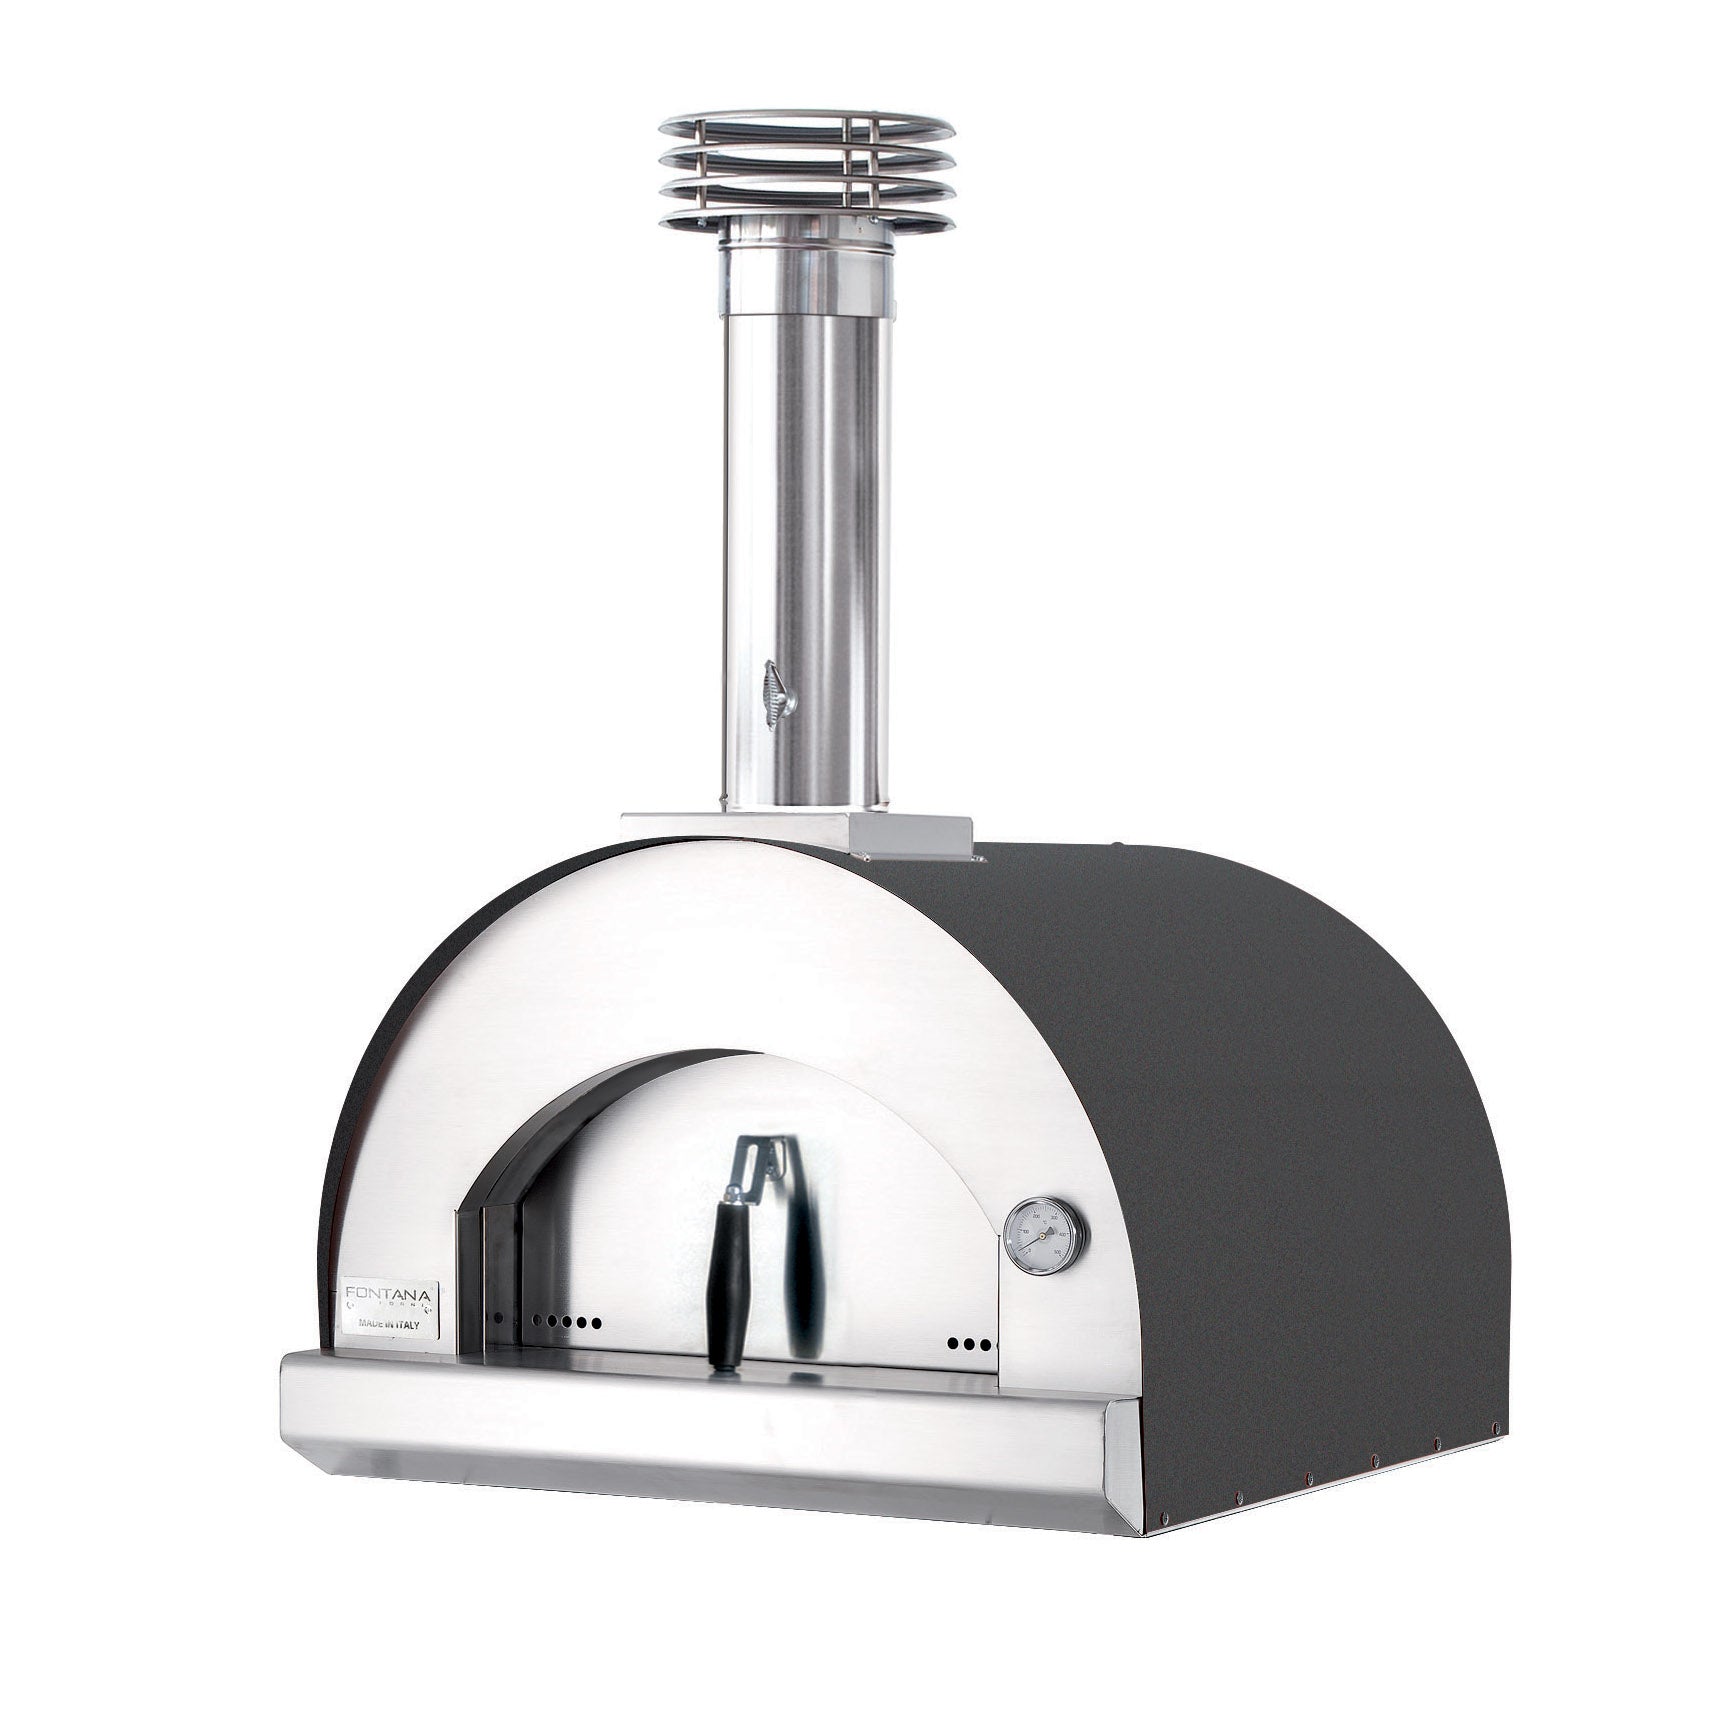 Fontana Margherita Built In Wood Pizza Oven - Anthracite